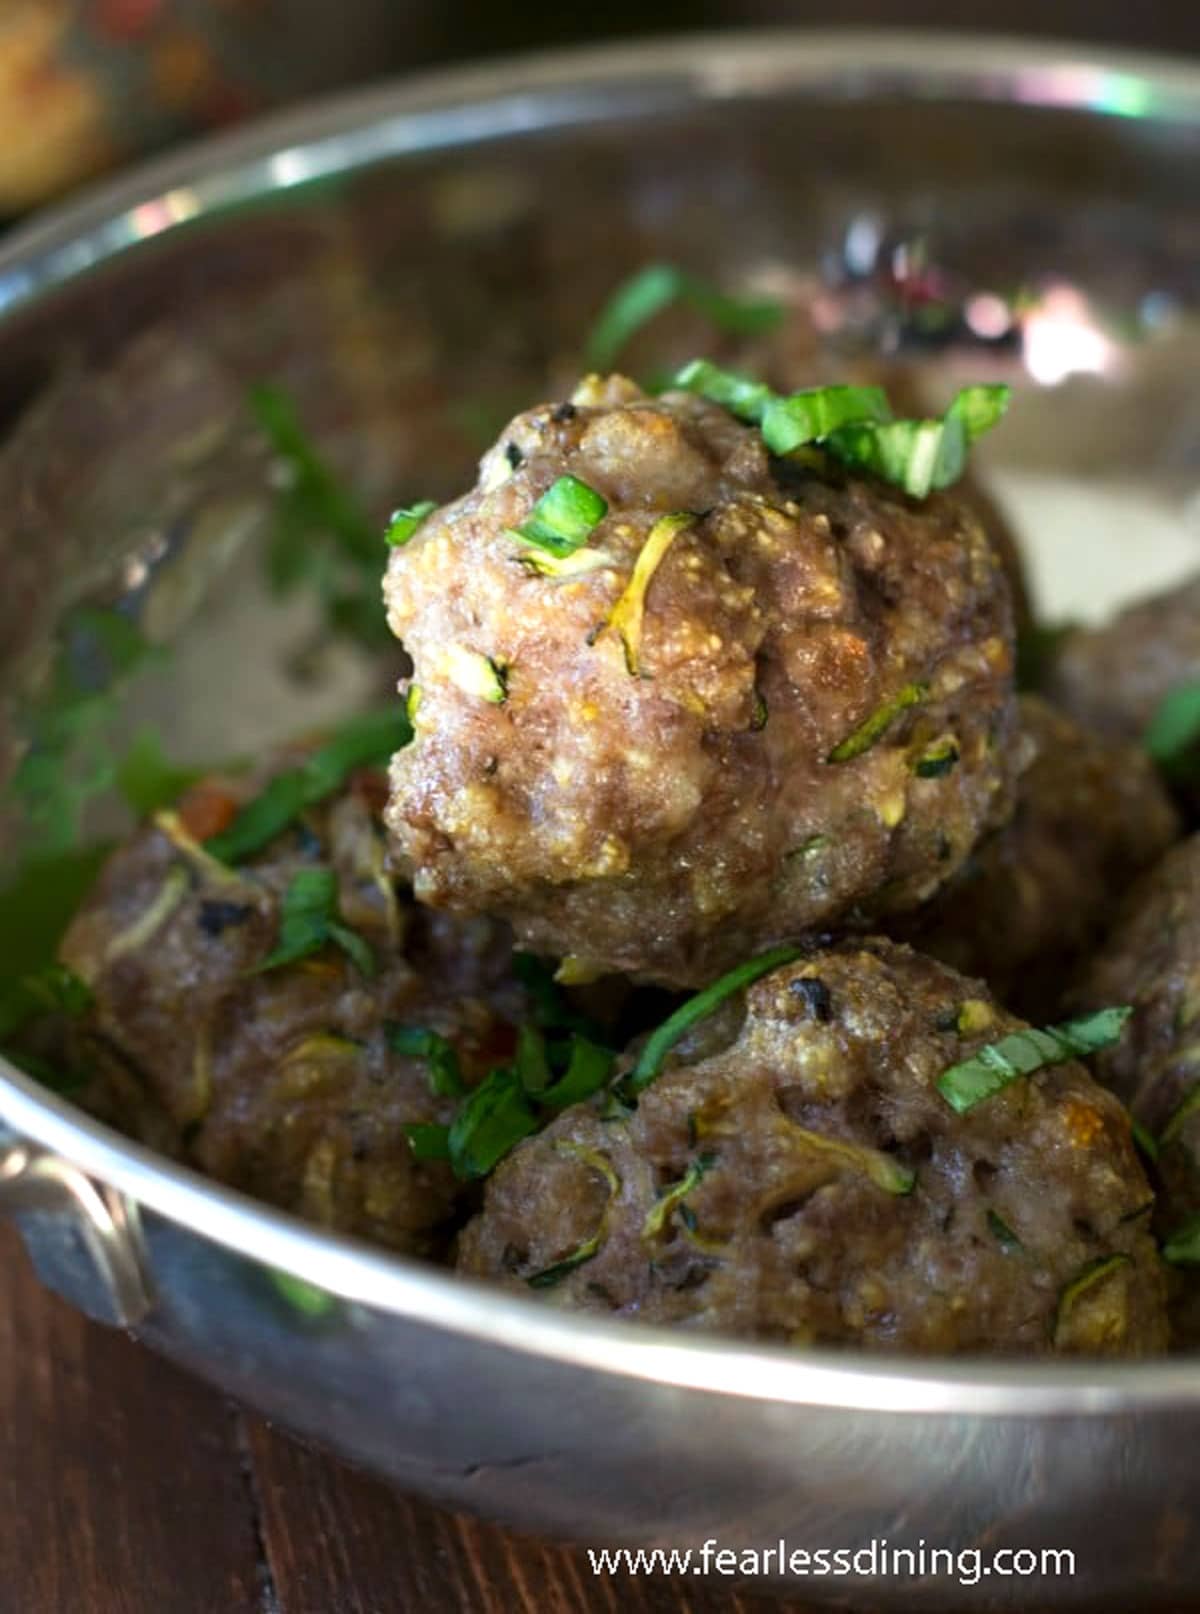 cooked meatballs in a silver bowl